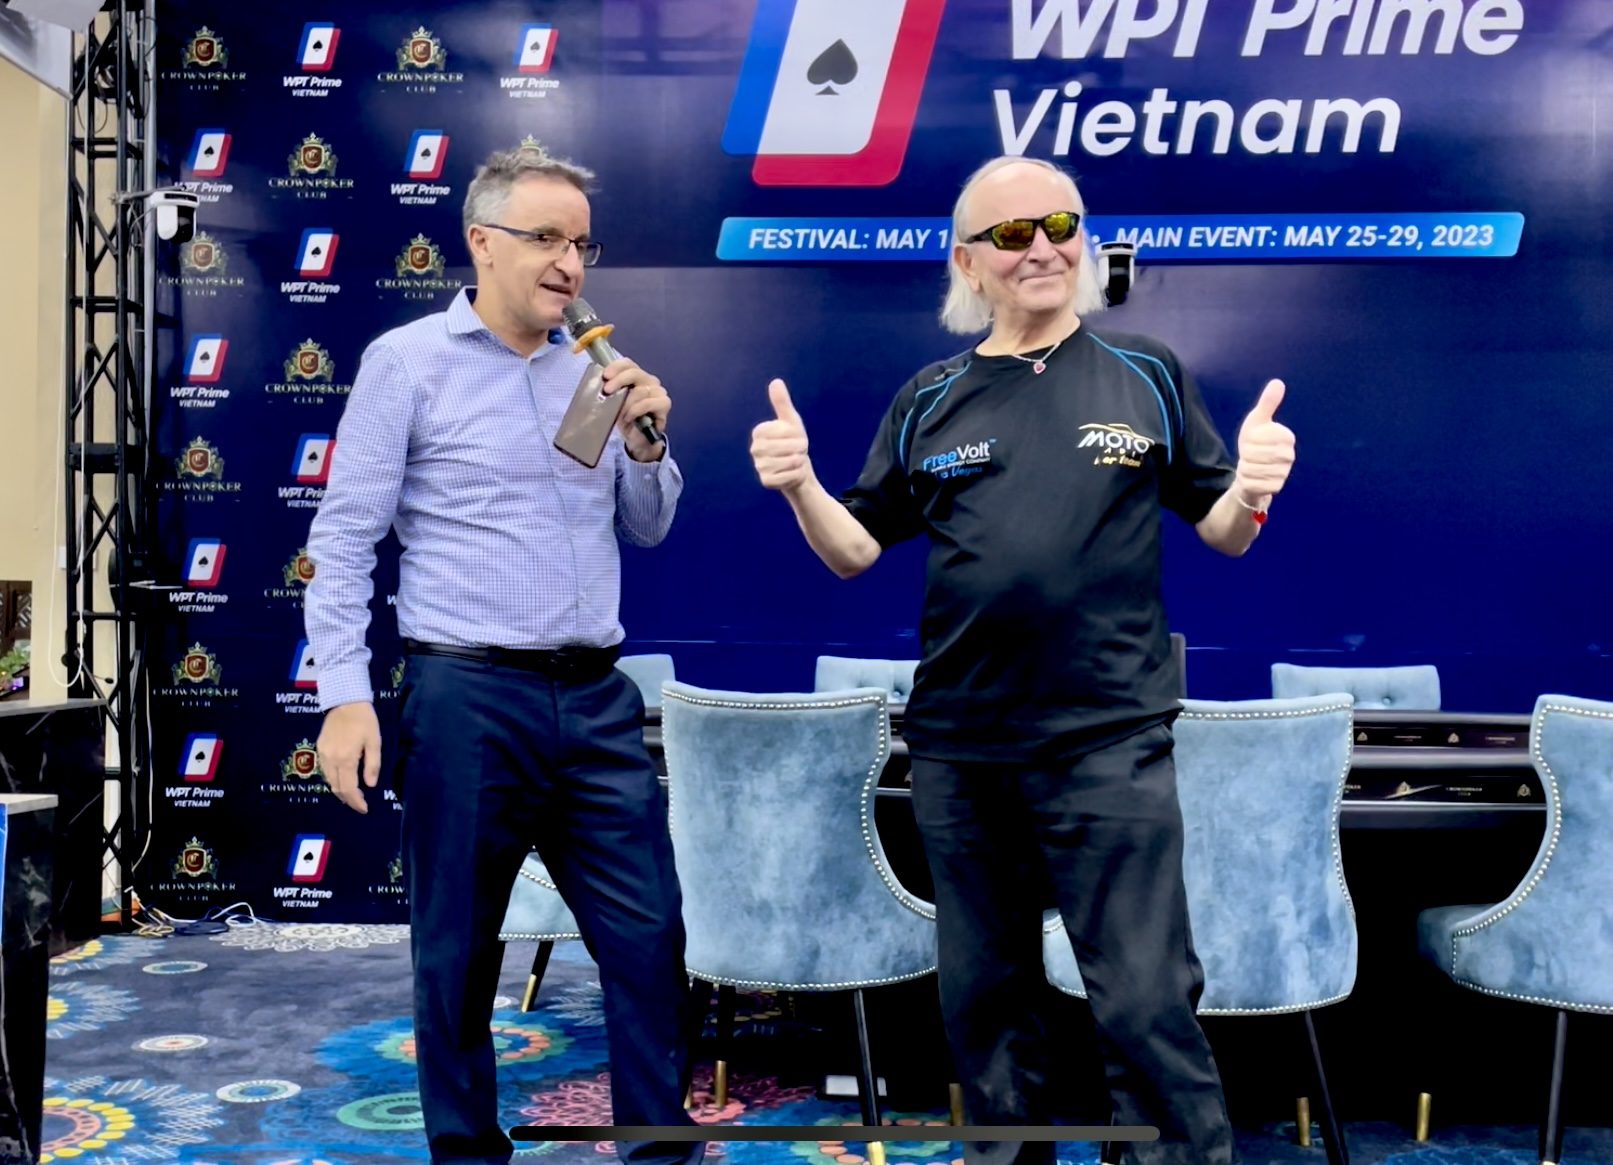 [Side stories] Globetrotter Miroslaw Klys sets new record for most flags; Thanh Tien Dinh leads POF race; Vinh Huu Nguyen draws largest bounty